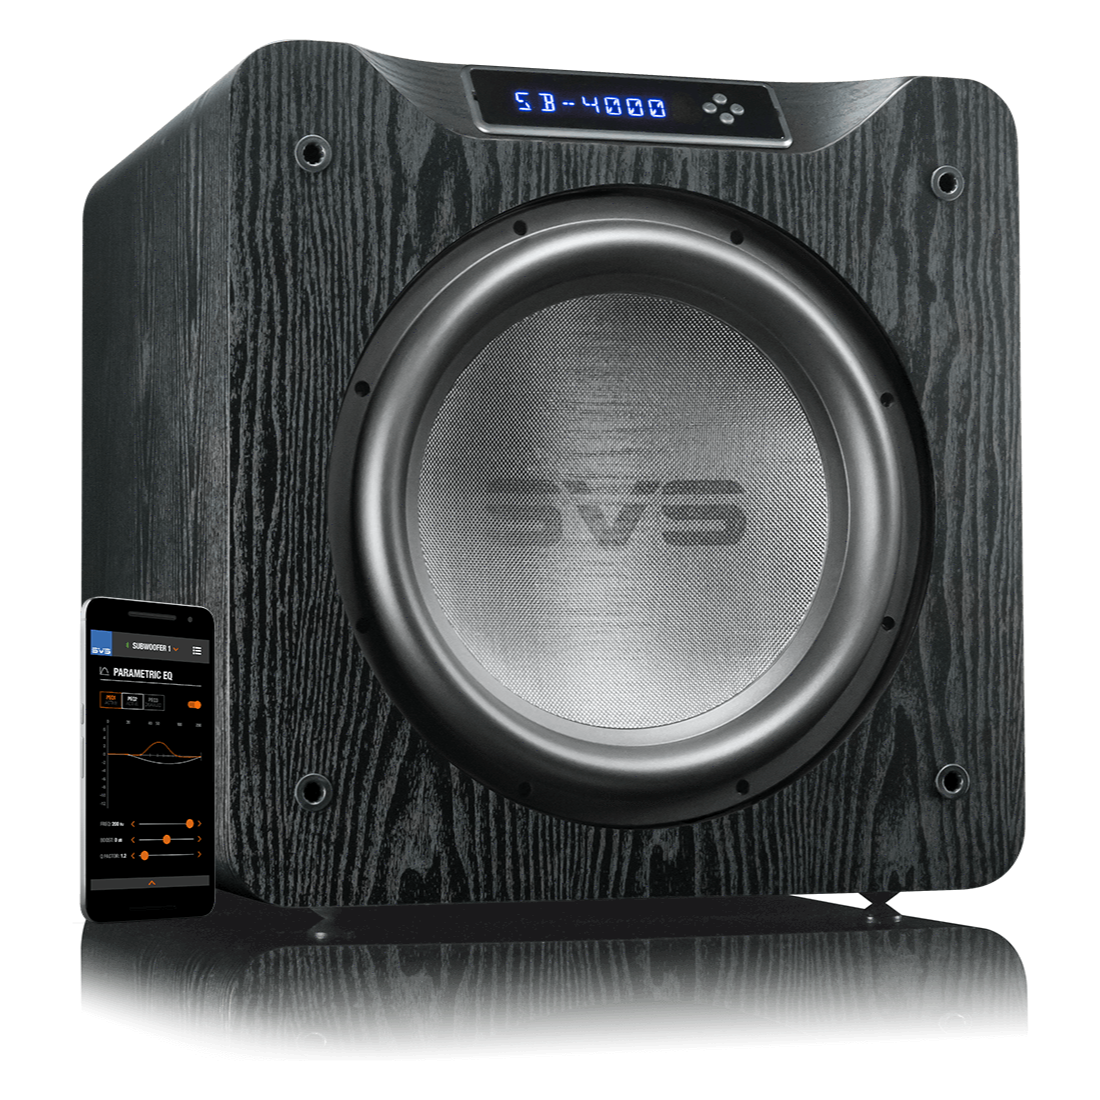 Energizes a space with effortless output, subterranean deep bass extension, and stunning musicality. SB-4000 sets all performance benchmarks for sealed subwoofers in its class and brings immersive home audio experiences to life. SB-4000 Chest-thumping slam and low frequency extension below the threshold of human hearing